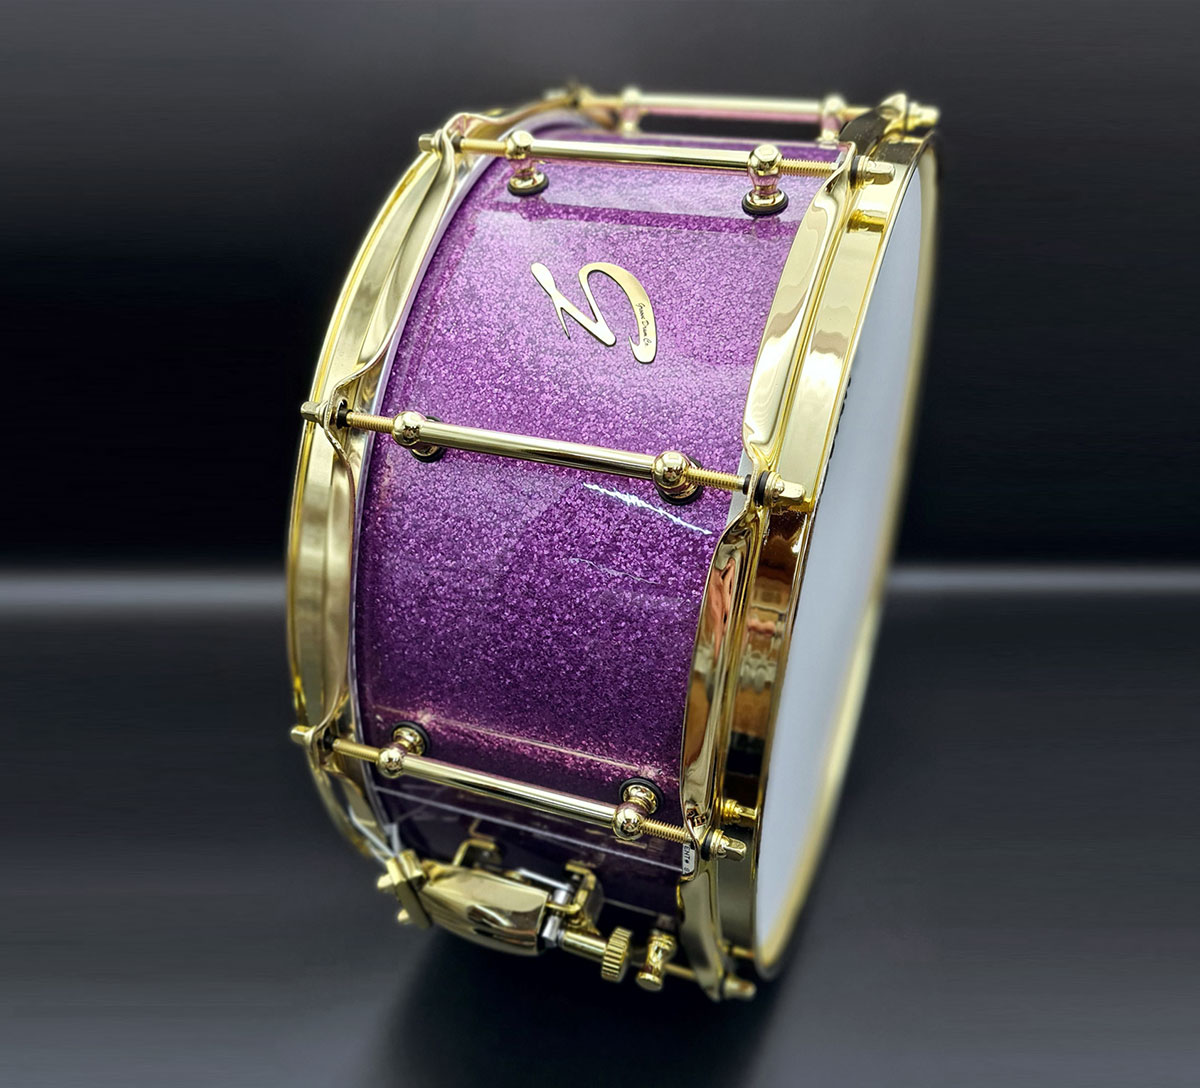 G Series Snare Drum